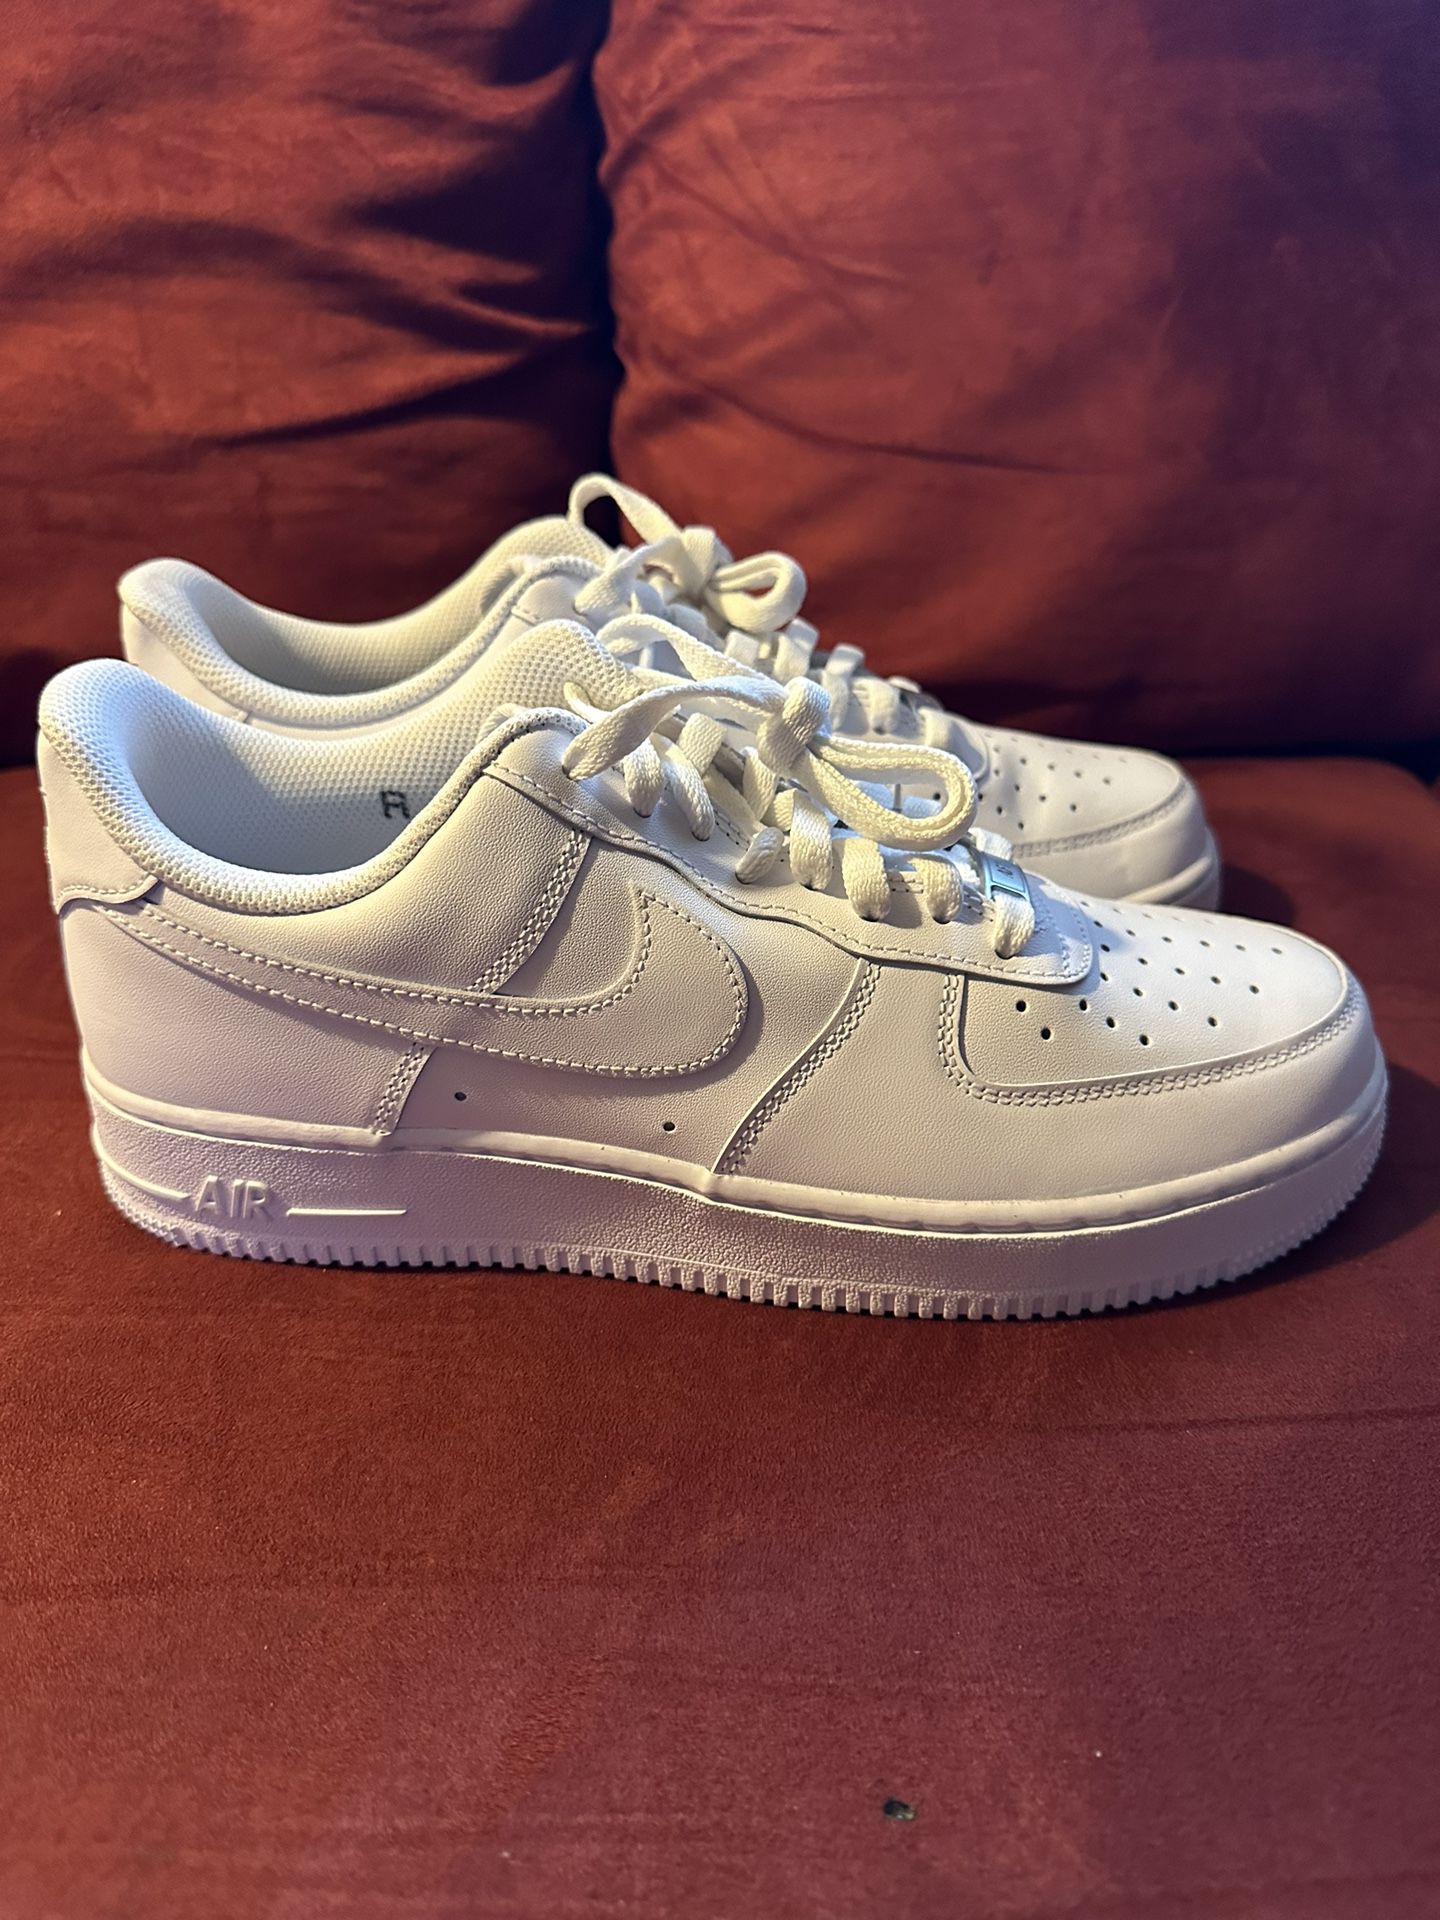 Buy Air Force 1 '07 'White' - 315122 111